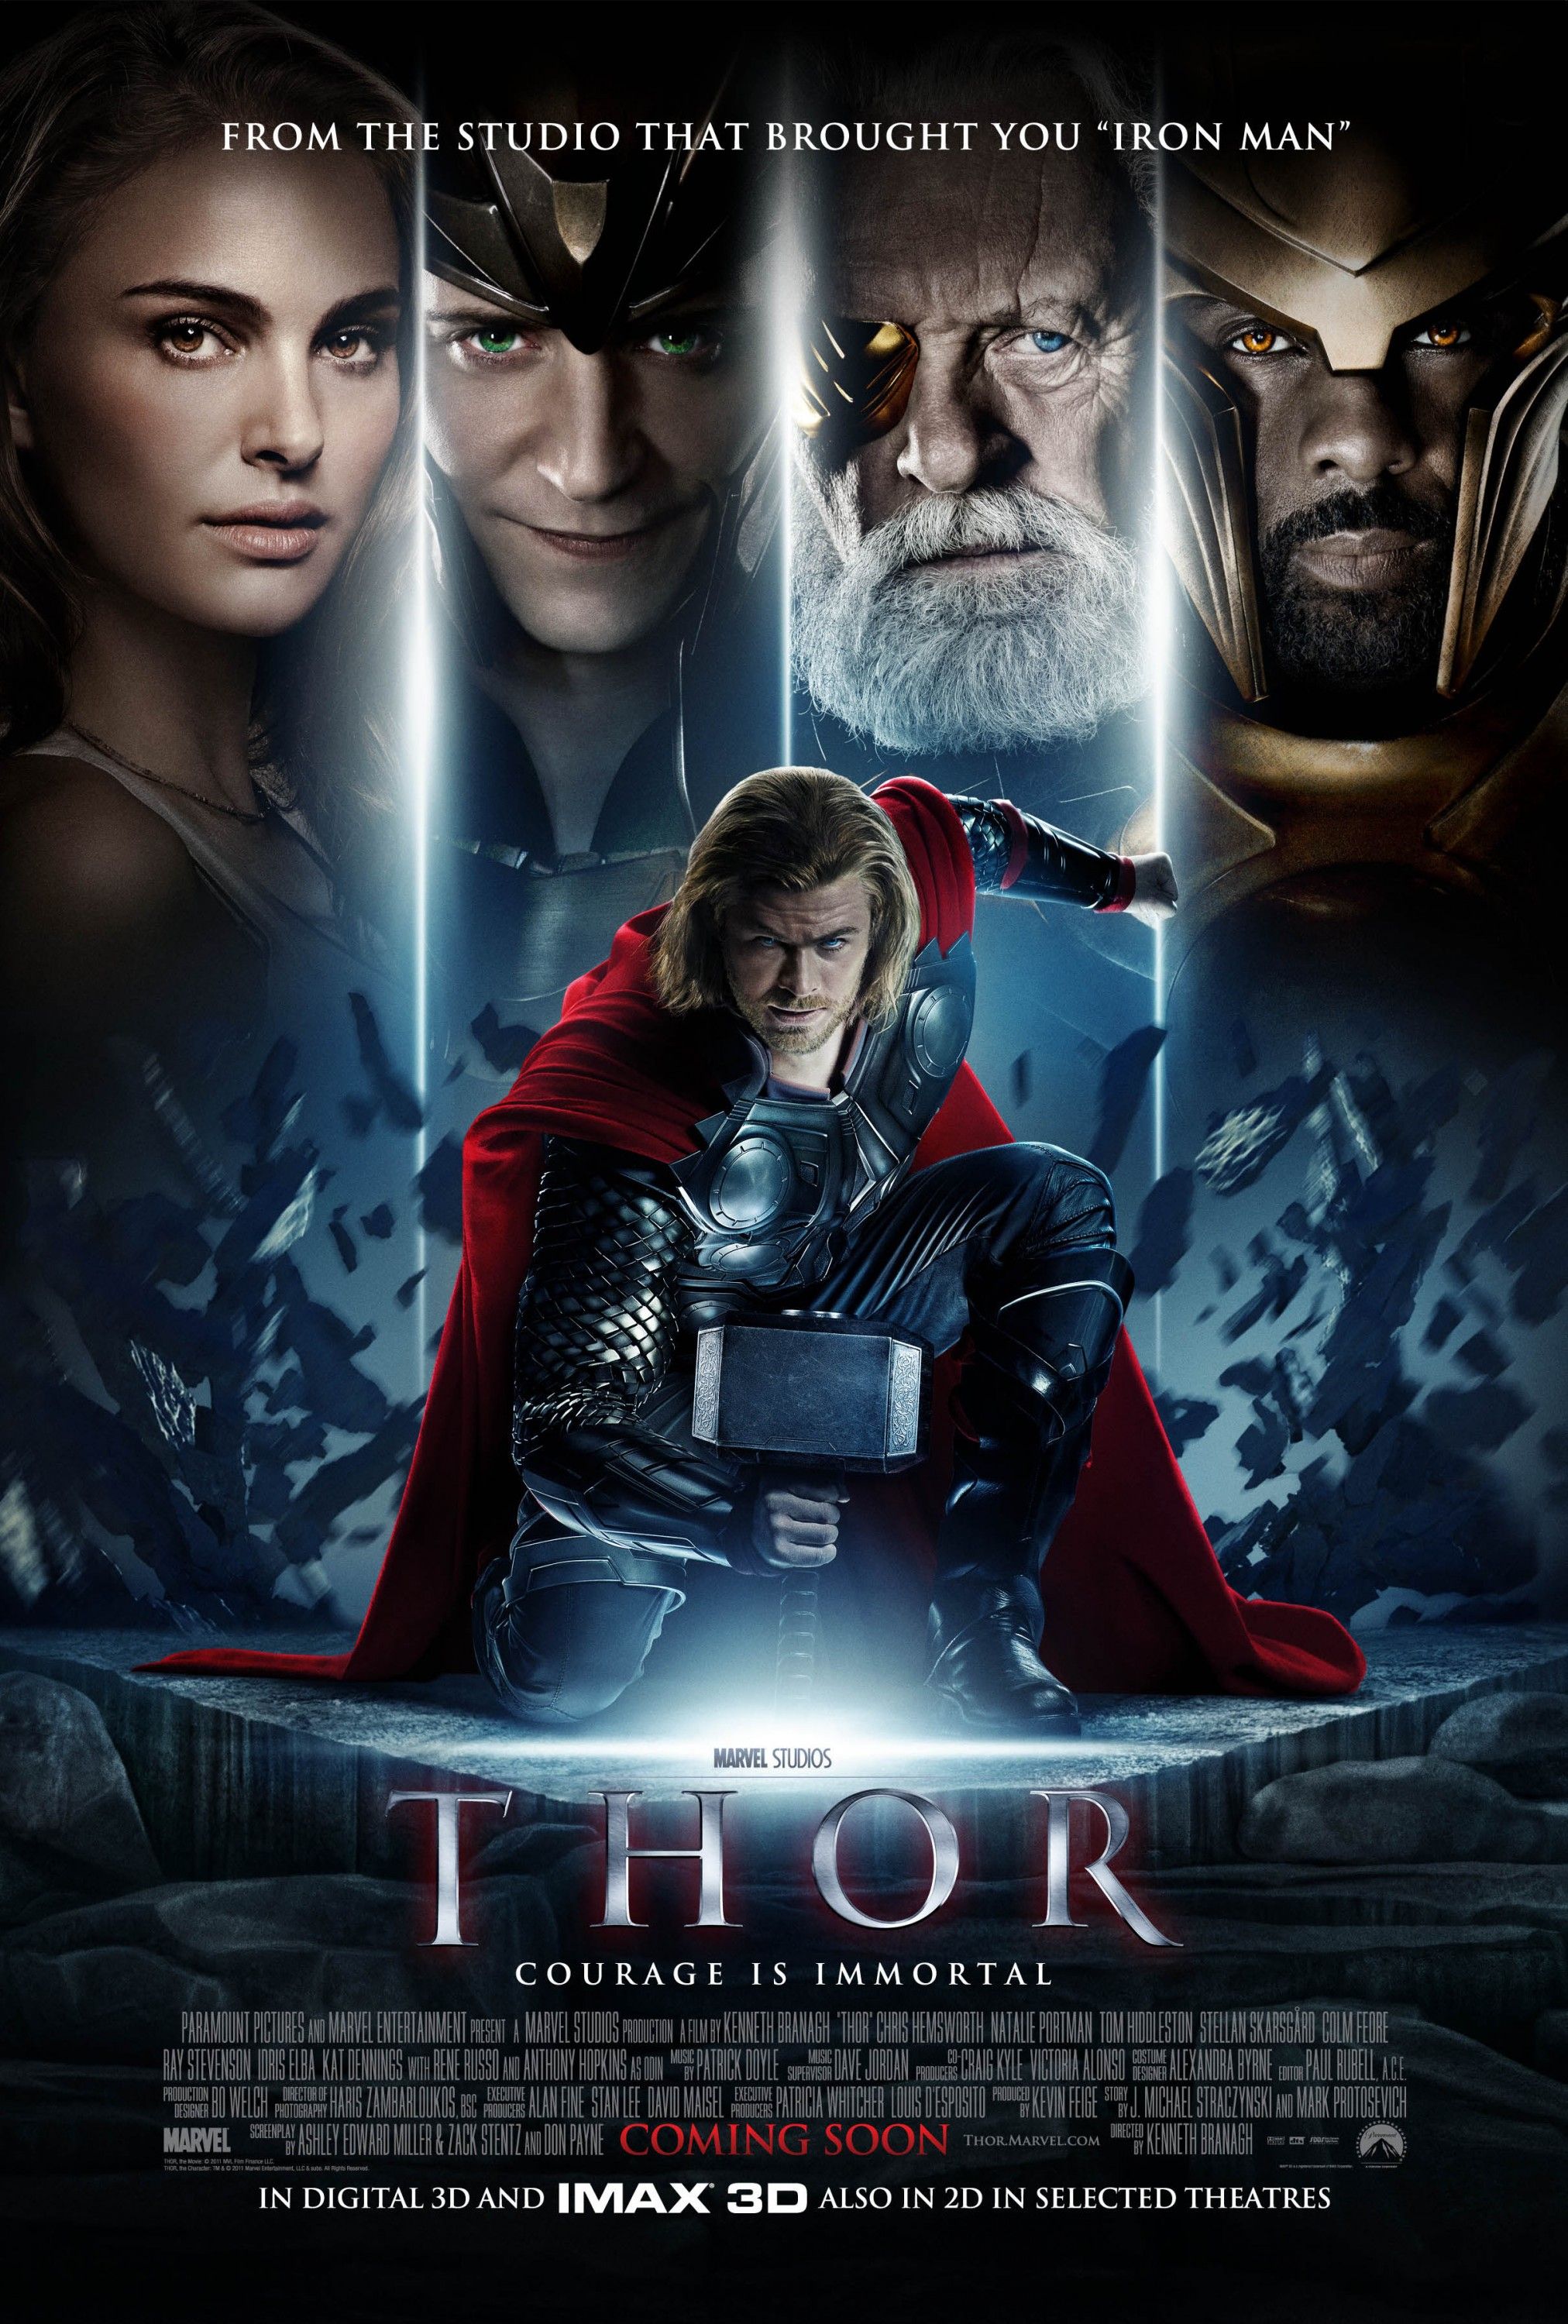 10 Things No MCU Fan Will Admit About Thor